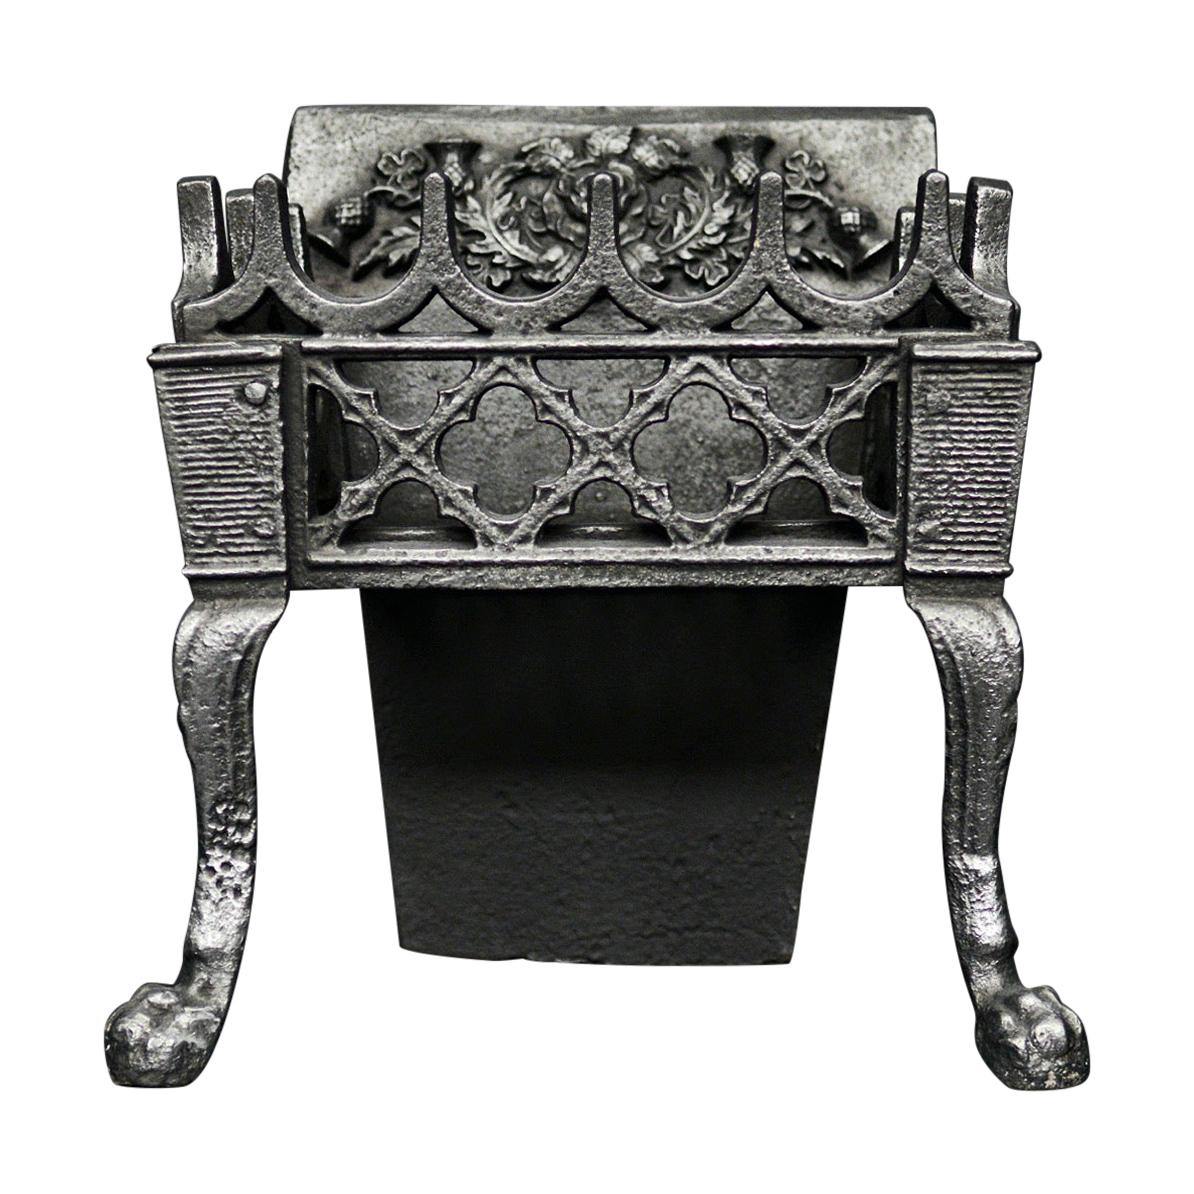 Neo-Gothic Style Firegrate For Sale